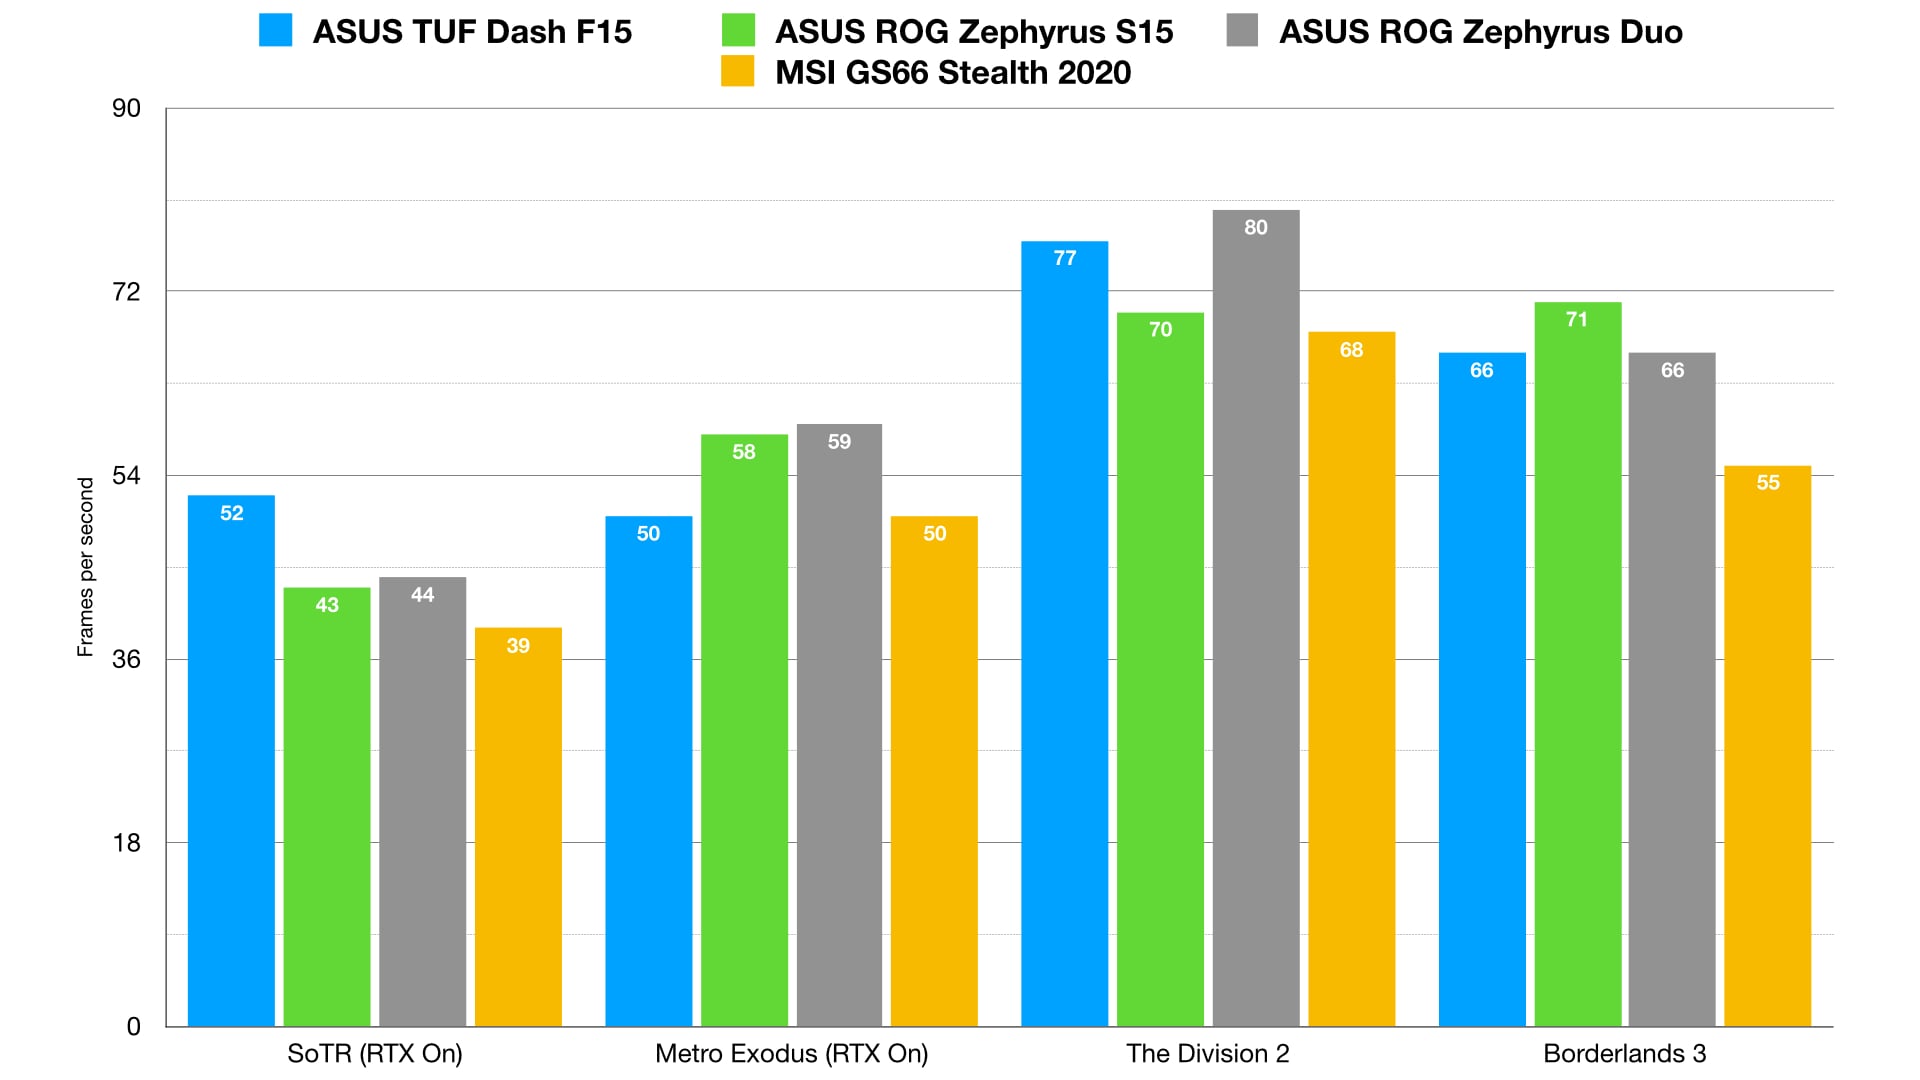 The F15’s RTX 3070 might be forced to run in a reduced power state, but the sheer graphical grunt of the newer GPU architecture helps it hold its own against the more power-hungry GPUs in older laptops.